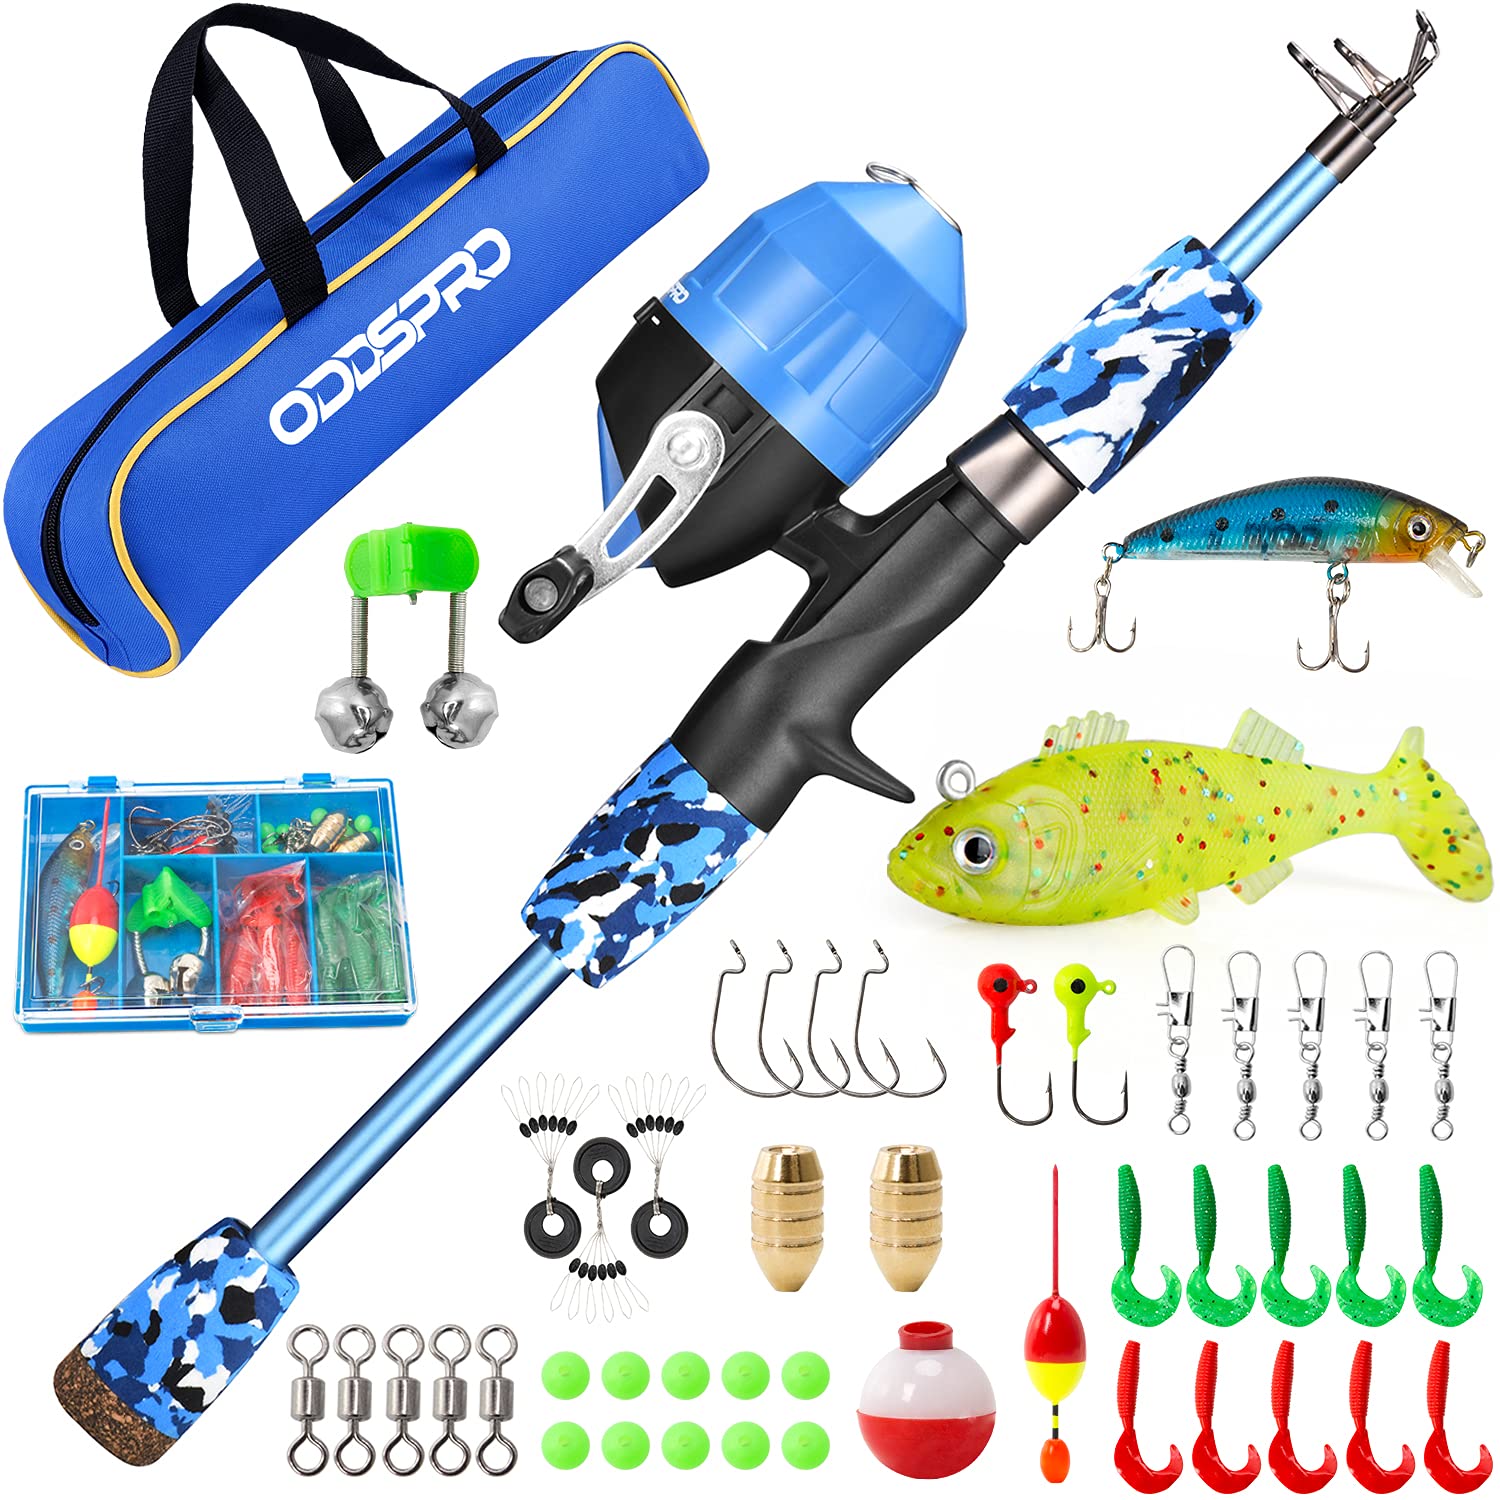 ODDSPRO Oddspro Kids Fishing Pole - Kids Fishing Starter Kit - With Tackle  Box, Reel, Practice Plug, Beginners Guide And Travel Bag For